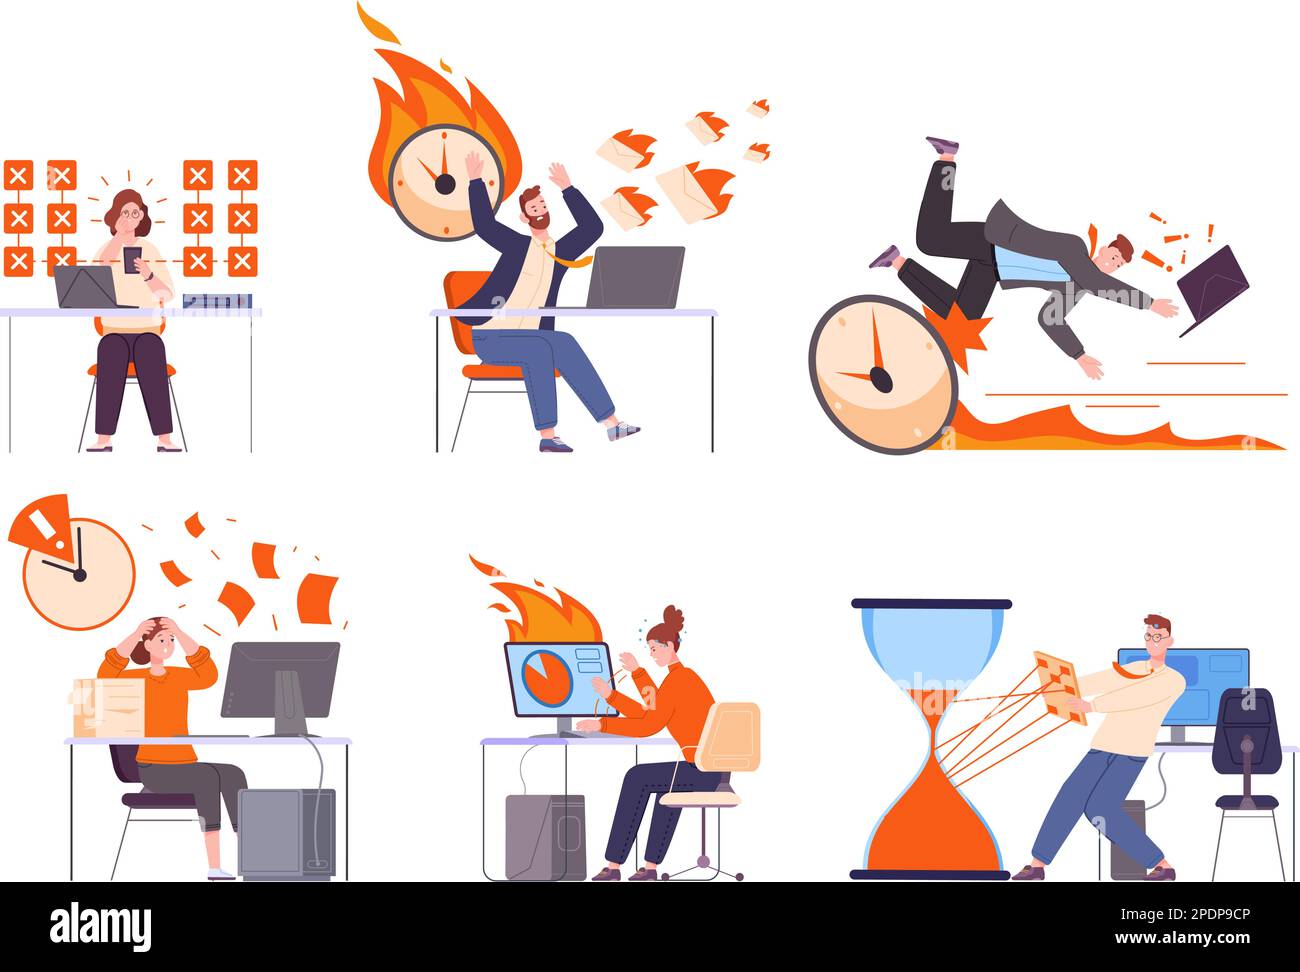 Unability of planning. Unable tasks inefficient plan time work, fail projects lazy people on computer stressful process organized tasking tools, vector illustration of inefficient task and planning Stock Vector